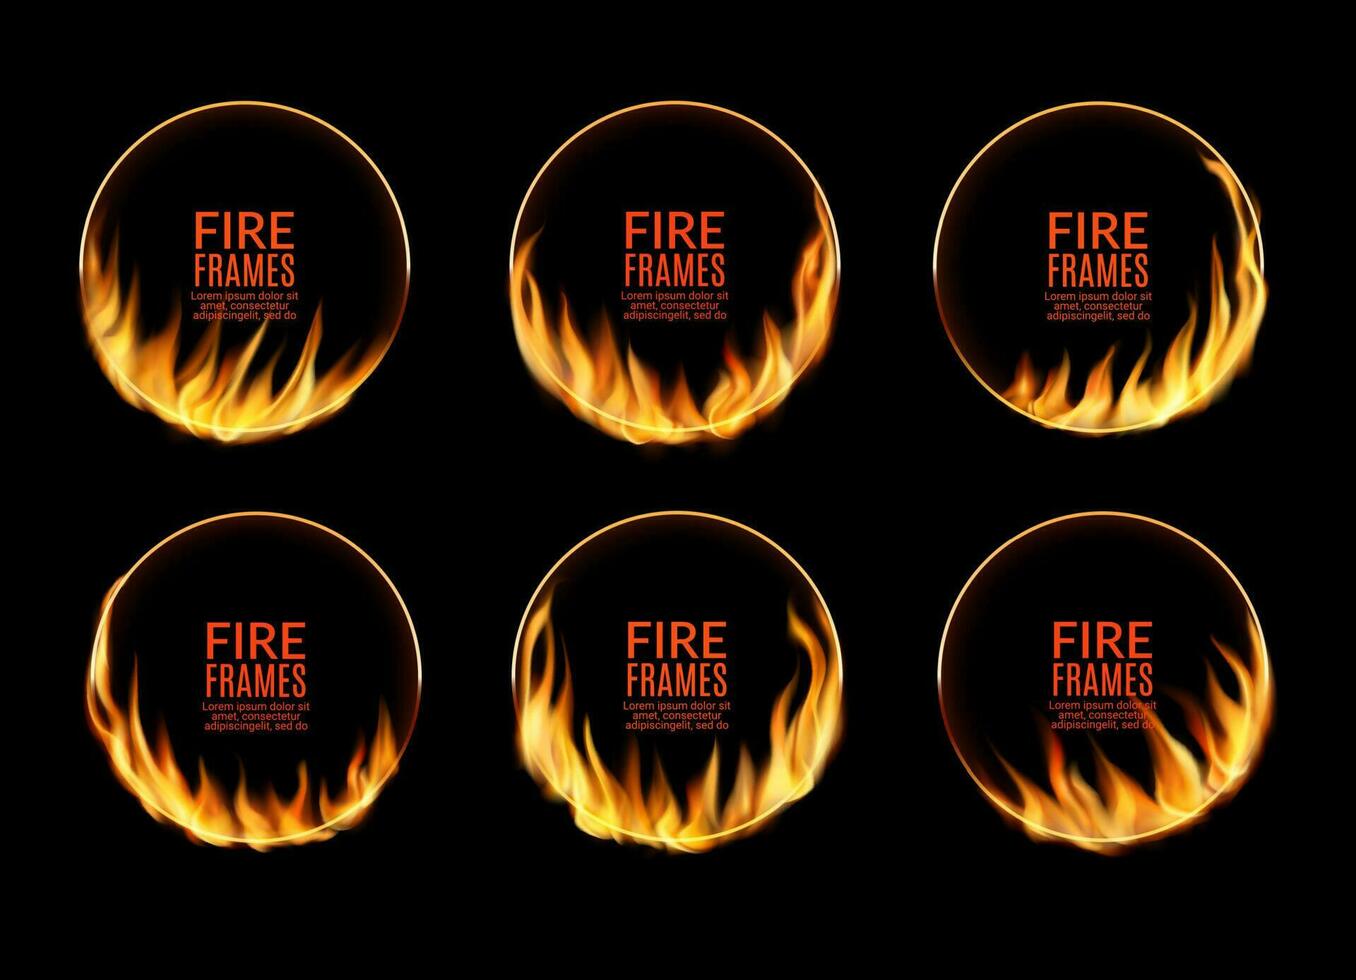 Round circus frames with fire flames, circle rings vector